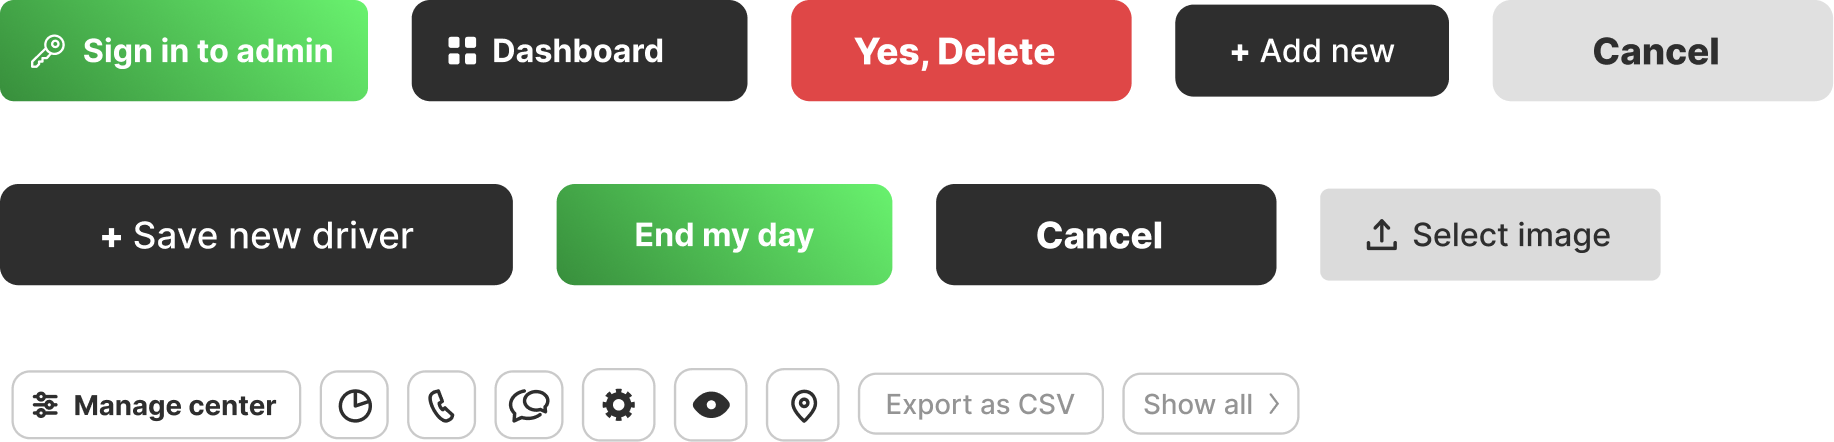 Button set created for Cycling Life admin panel web app